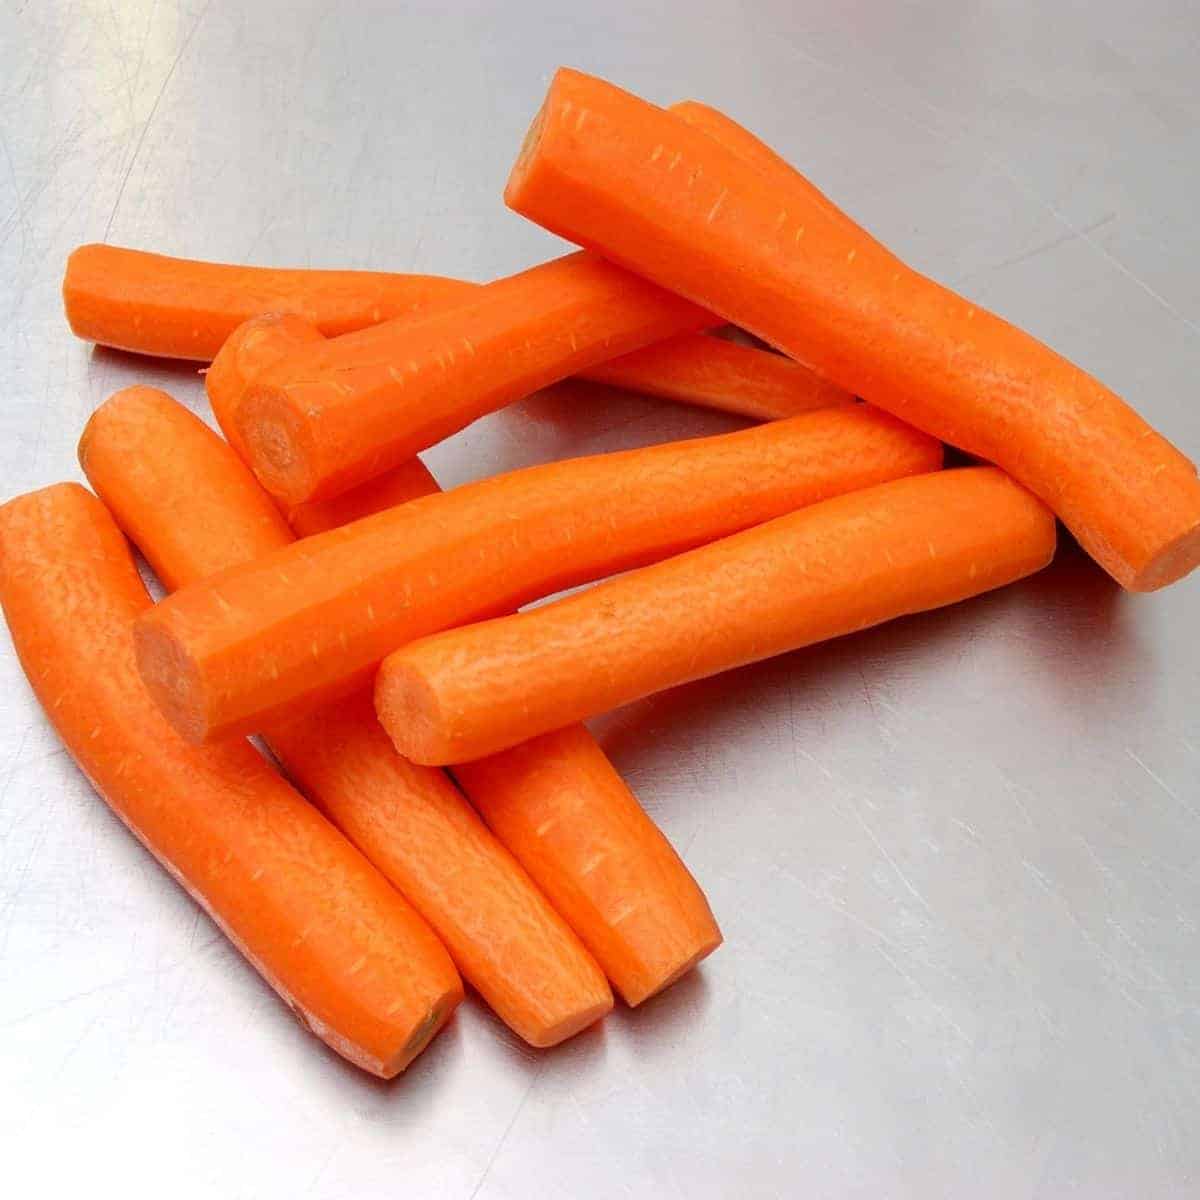 How to peel carrots quickly and easily